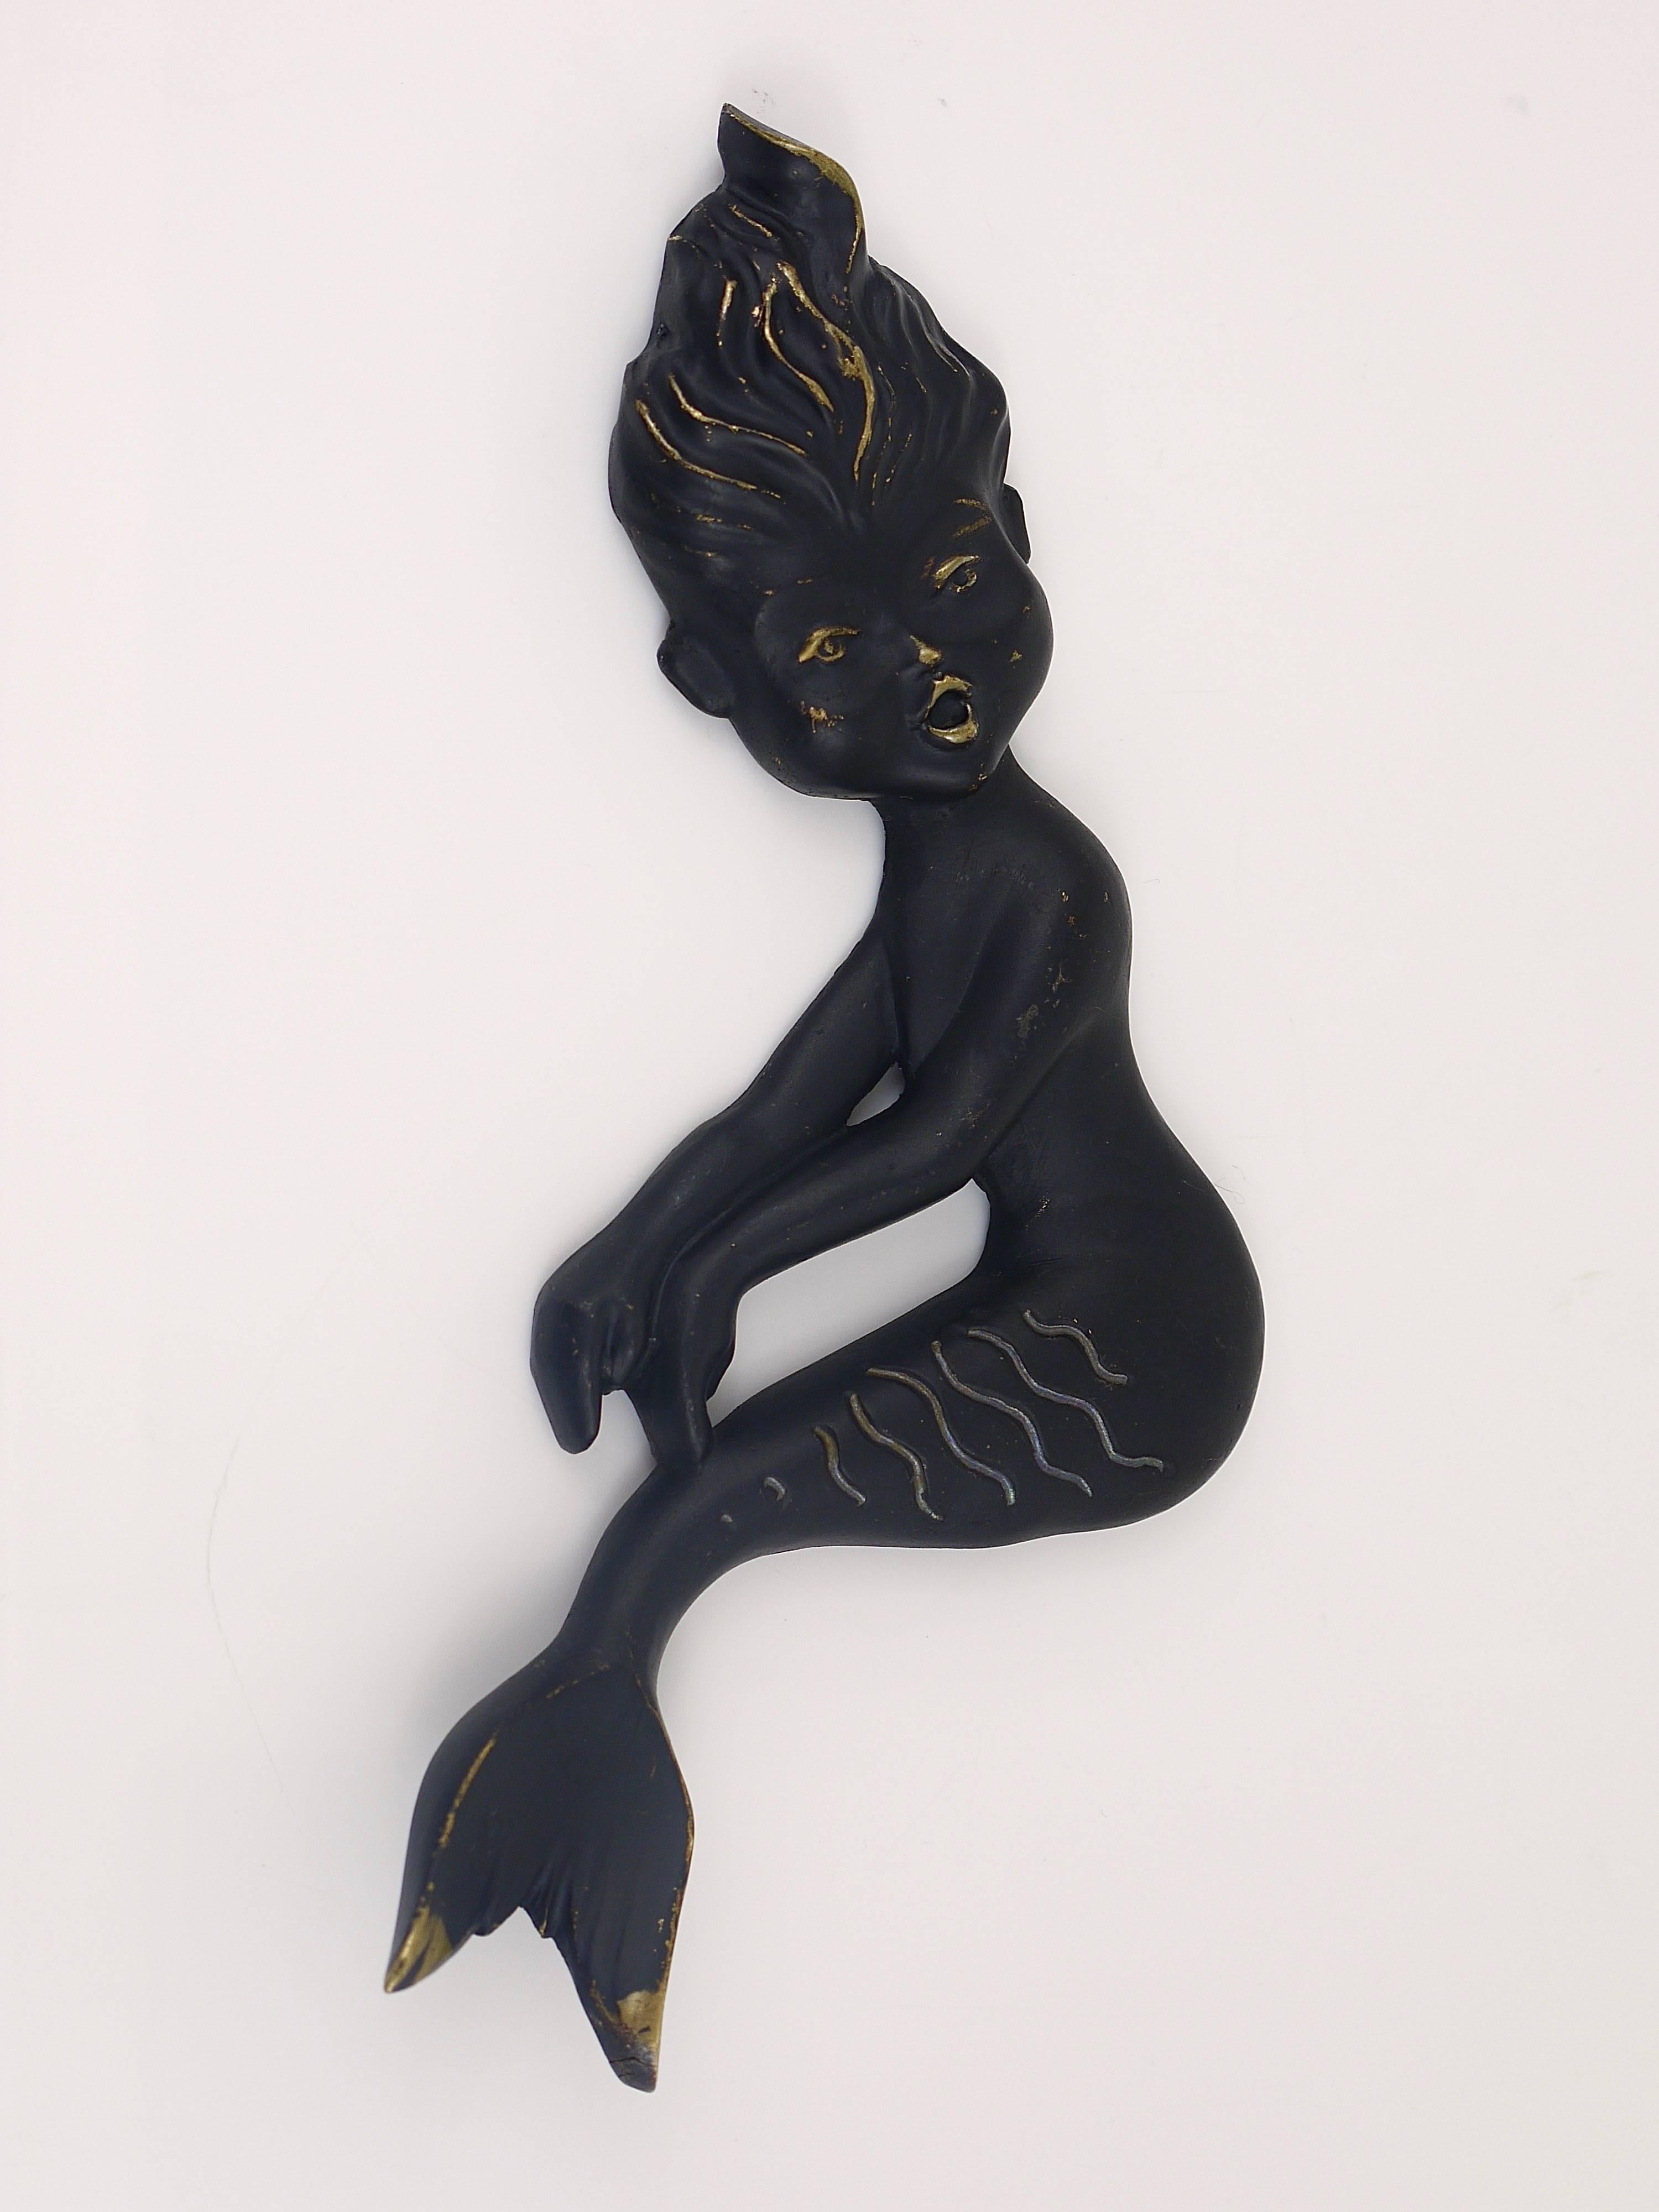 A lovely Mid-Century mermaid sculpture, made of black-finished brass. Designed by Walter Bosse, manufactured in the 1950s by Hertha Baller, Austria. In very good condition. A very decorative piece. 
We offer more Walter Bosse brass objects in our